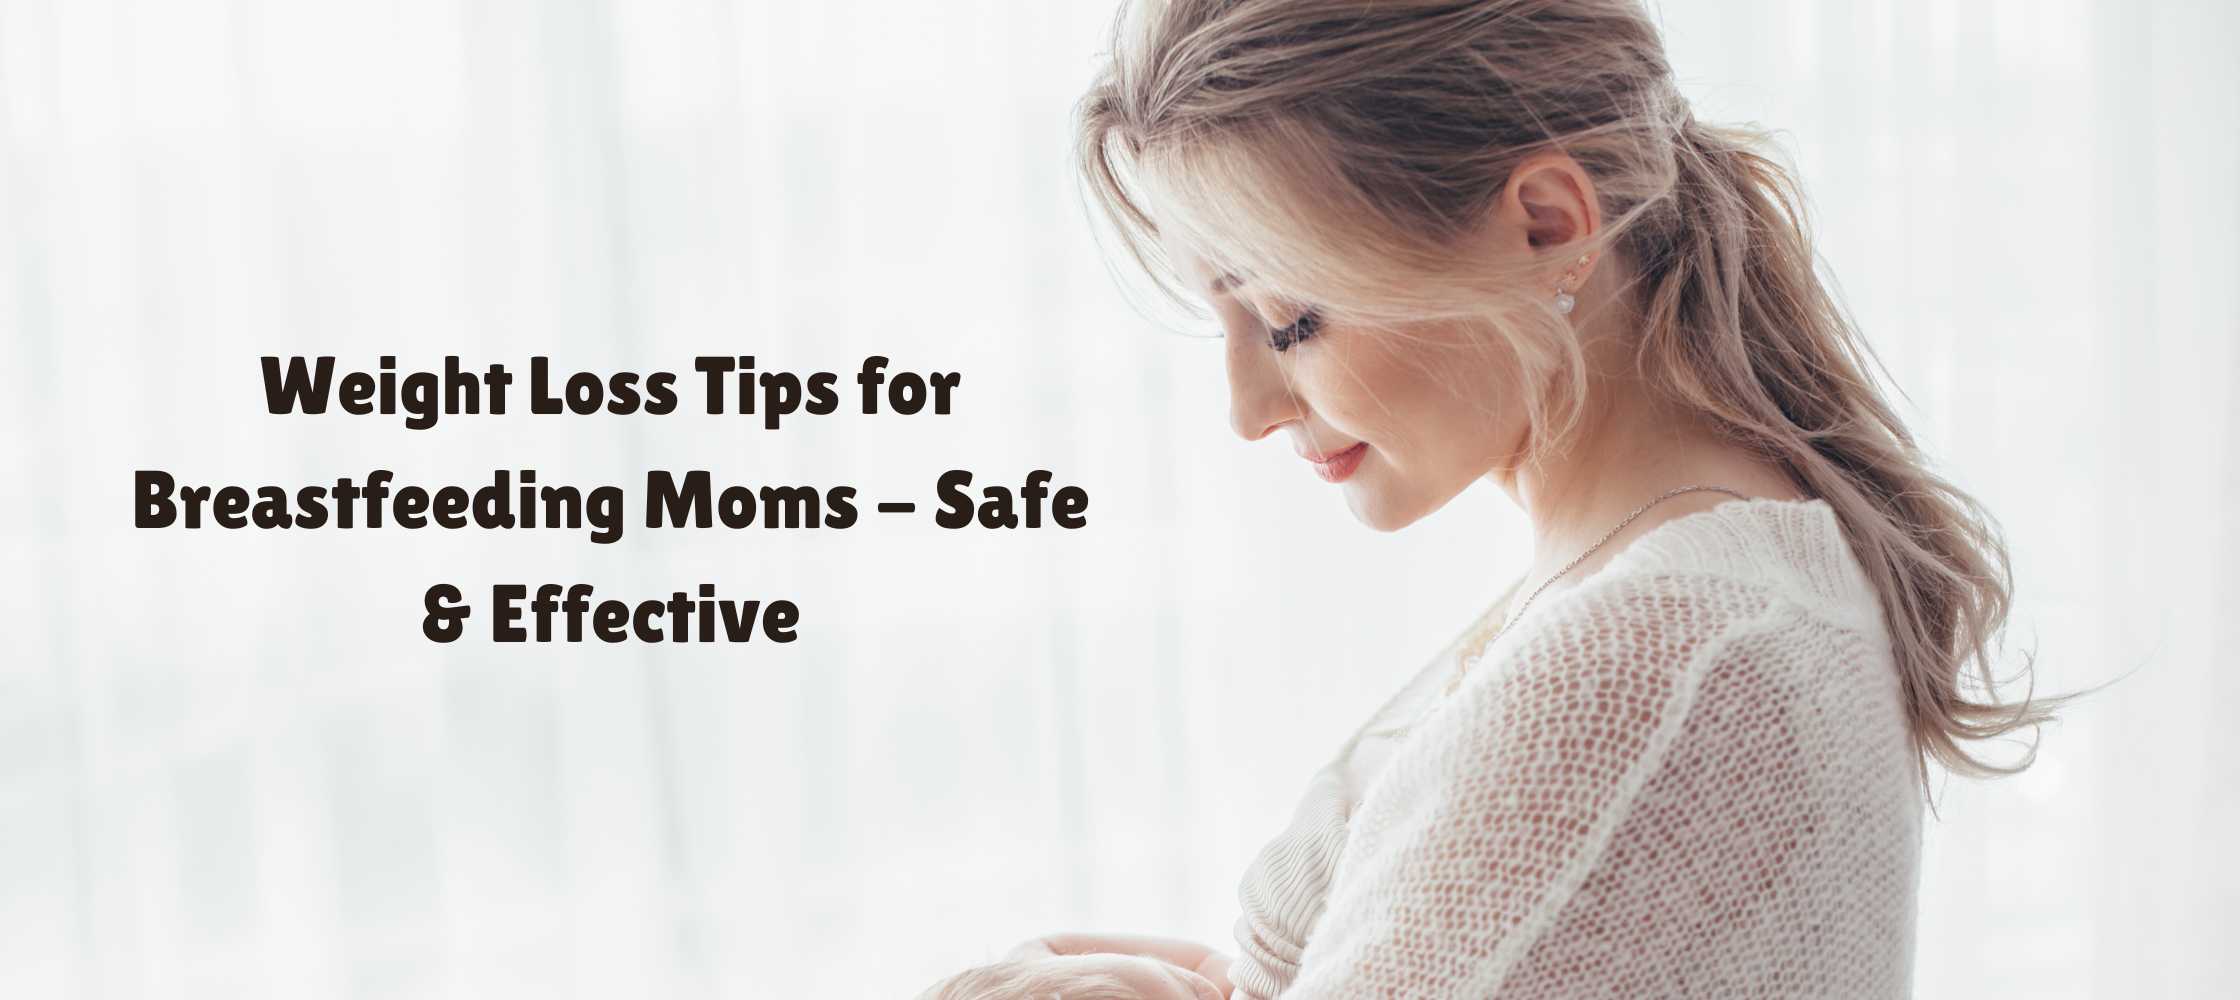 Weight Loss Tips for Breastfeeding moms